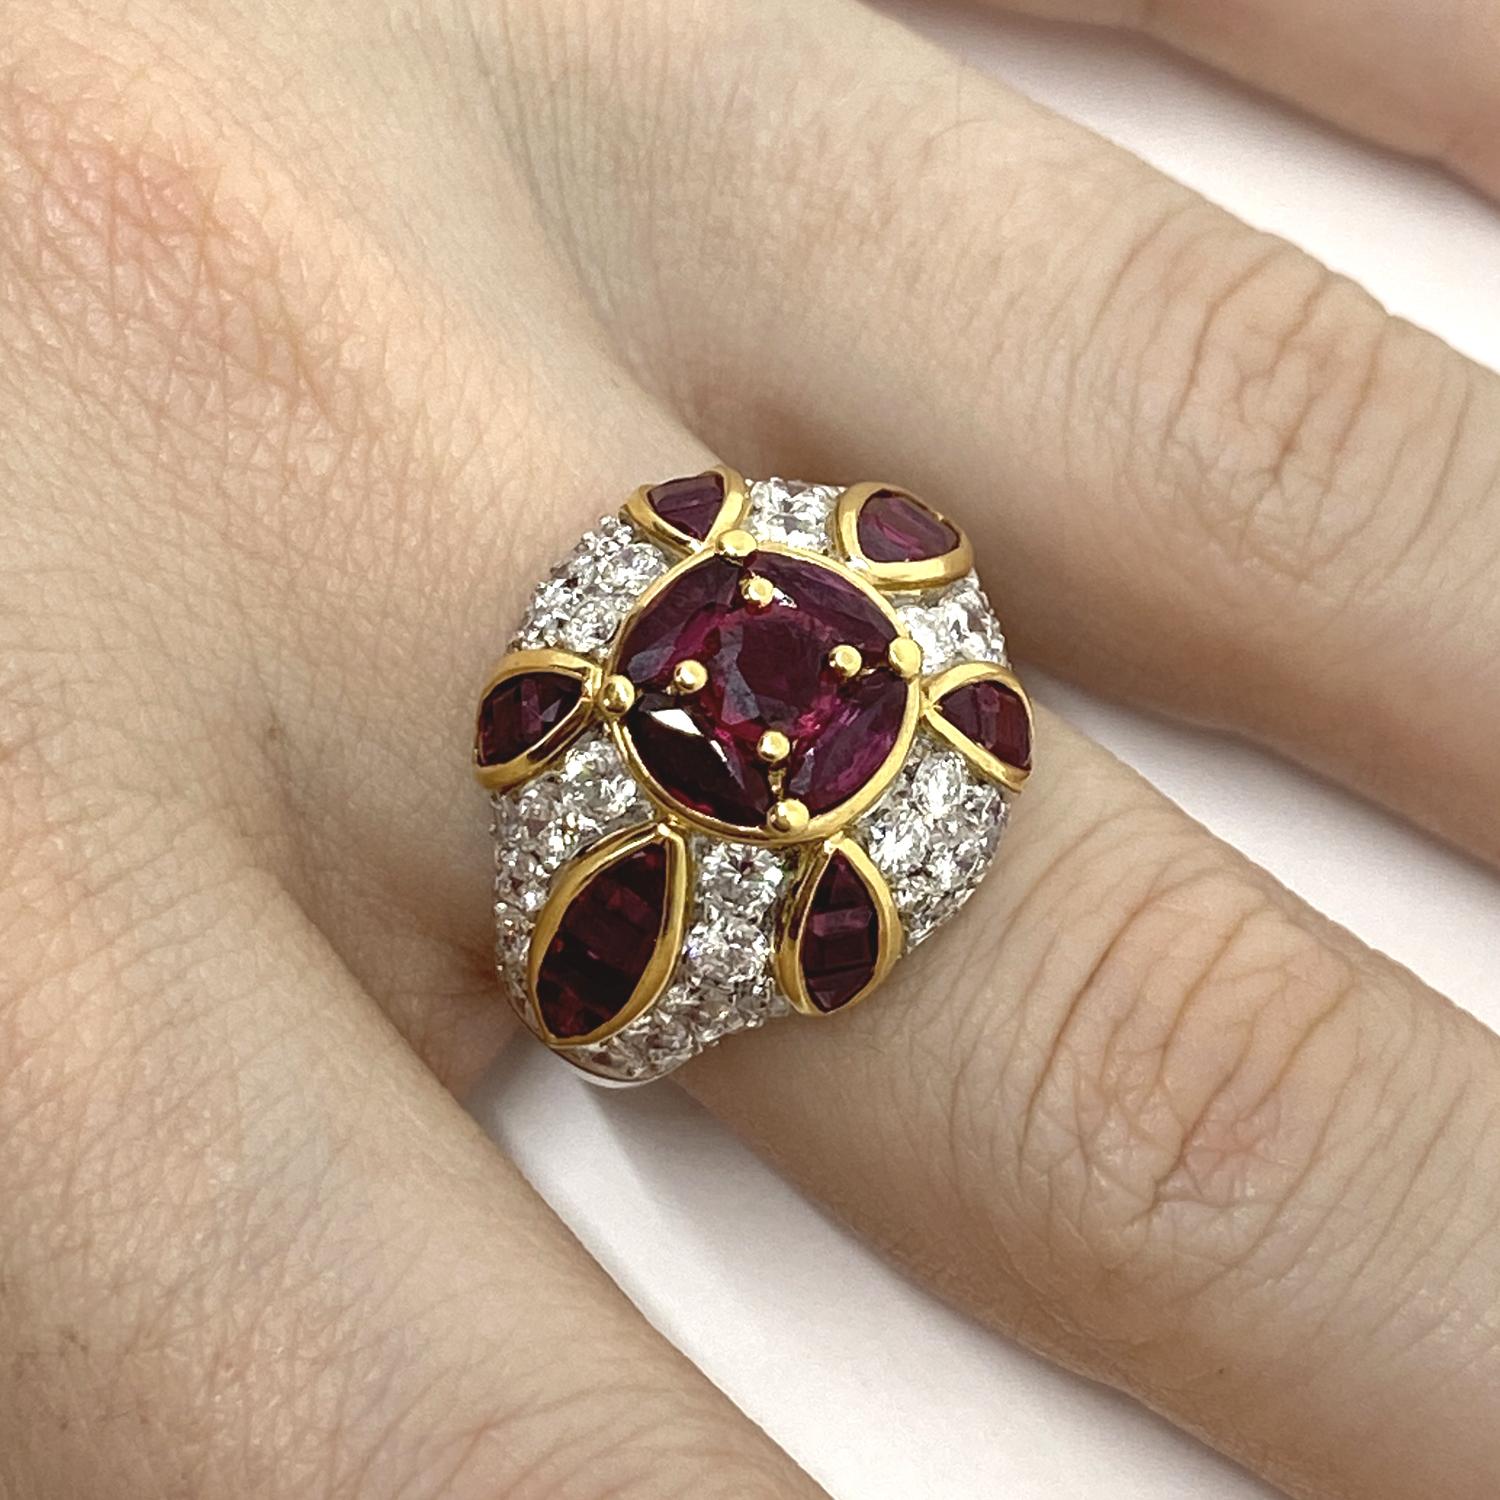 Ring made of 18kt yellow and white gold with white brilliant-cut natural diamonds for ct.1.80 and natural navette-cut and baguette-cut rubies for ct.3.30

Welcome to our jewelry collection, where every piece tells a story of timeless elegance and